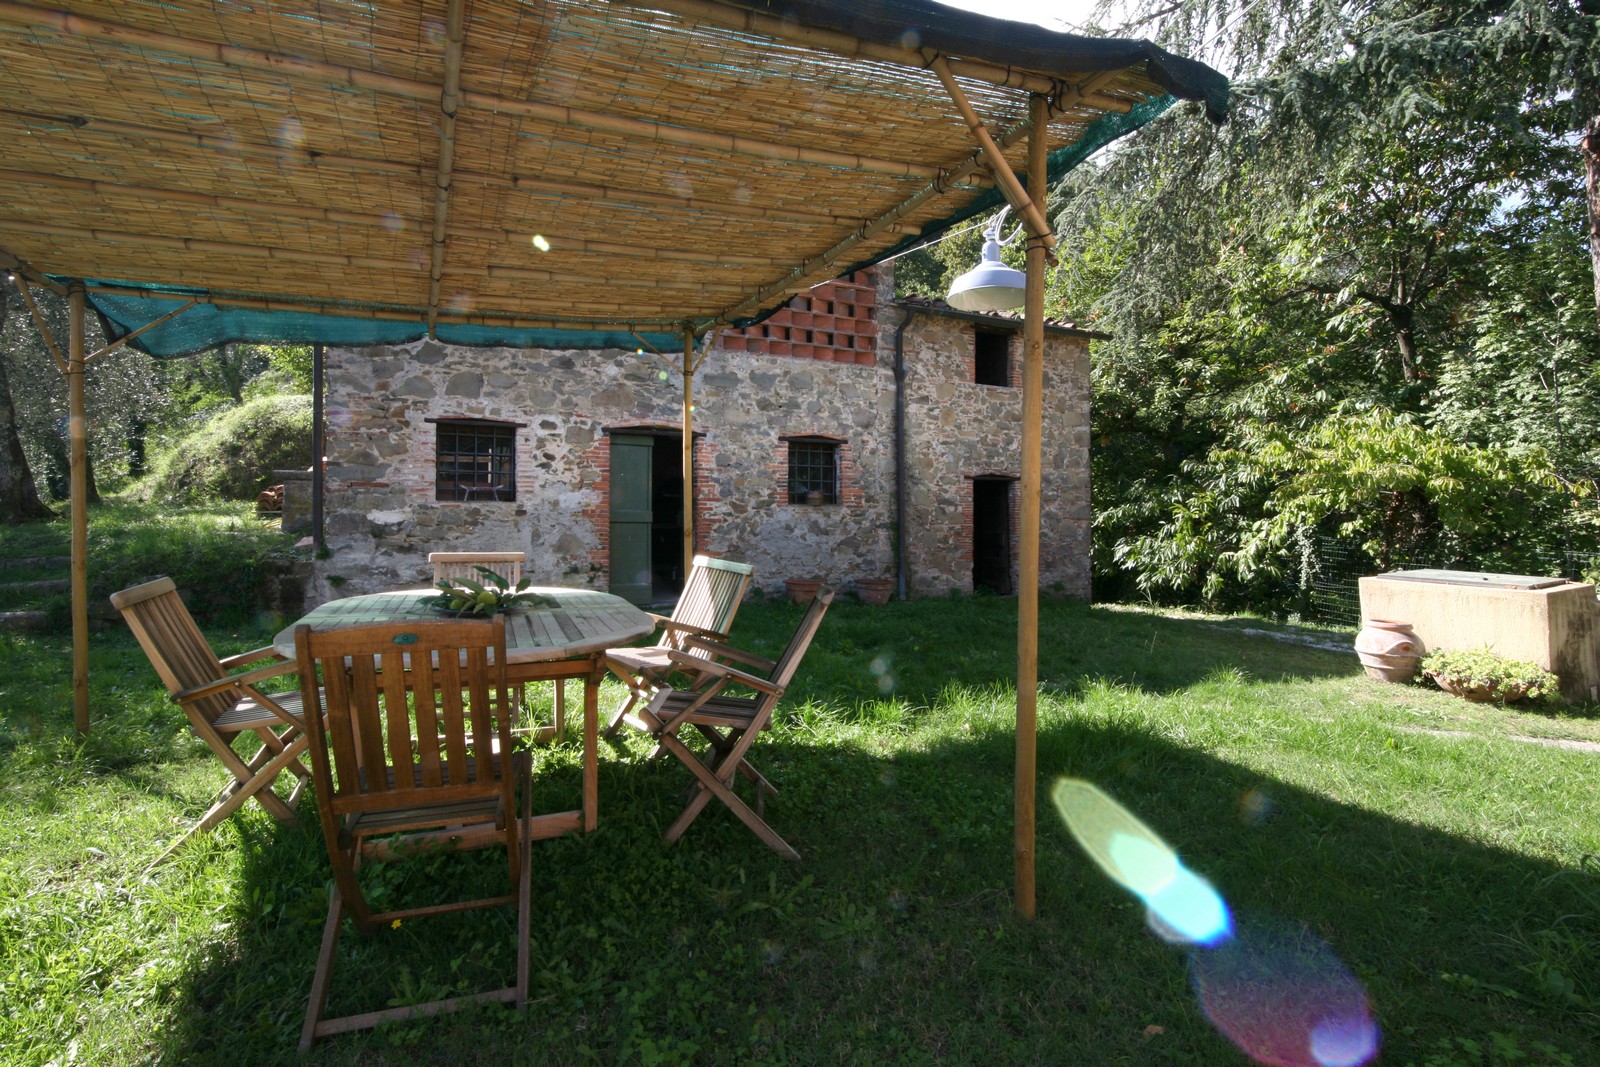 Large restored stone house near to Camaiore